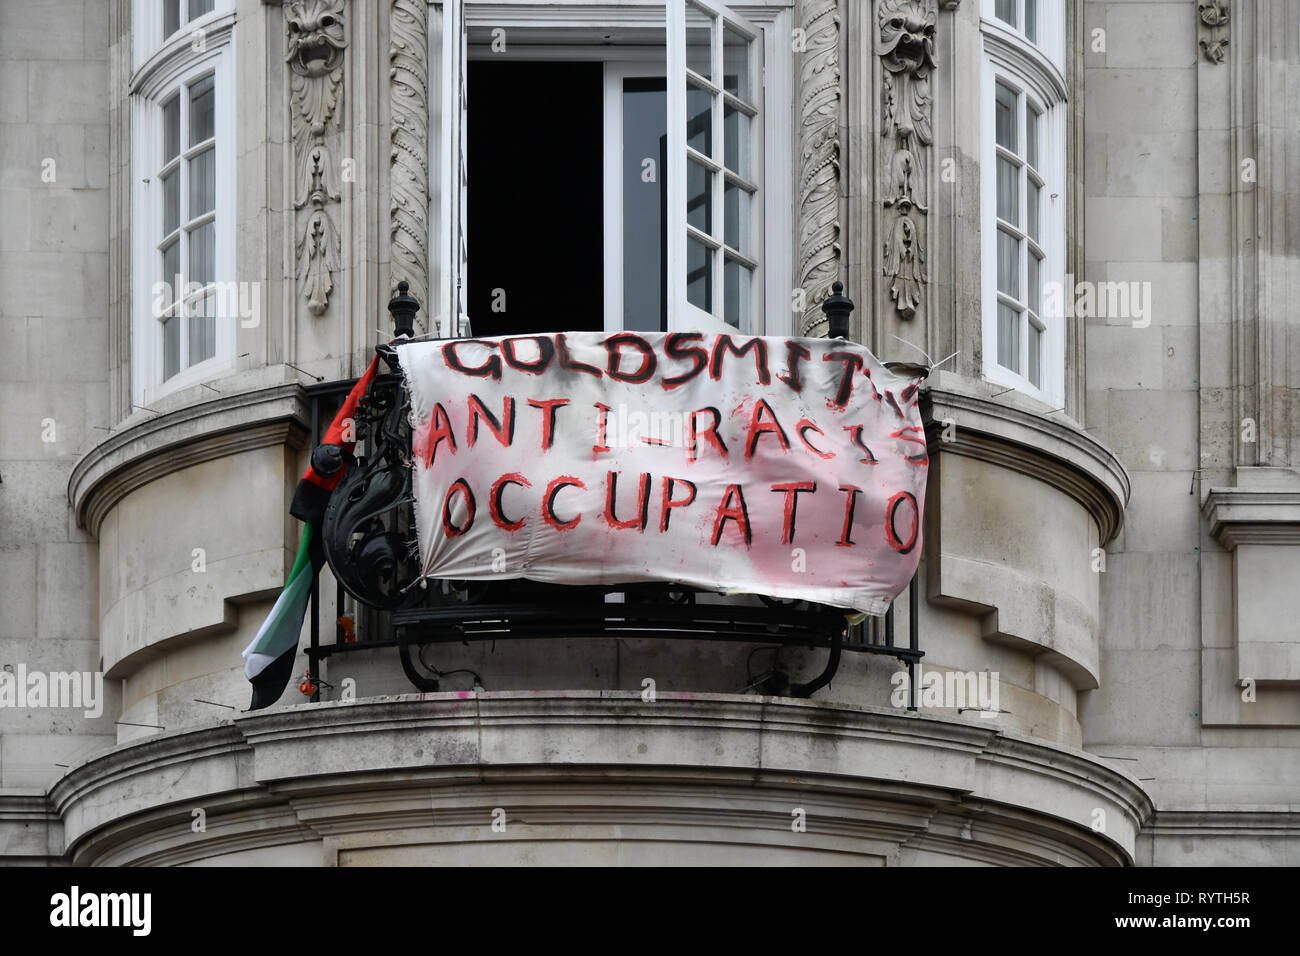 London, UK. 15th Mar 2019. Protesters of Goldsmiths Anti-Racist Action take action occupied Deptford Town Hall building, Education Officer Hamna Imran was attacked at election week, faced racist abuse— with graffiti mocking her accent and her banner being stripped down. Shame on the UK demon-cracy racism year in year oppresses of all minority. Credit: Picture Capital/Alamy Live News Stock Photo